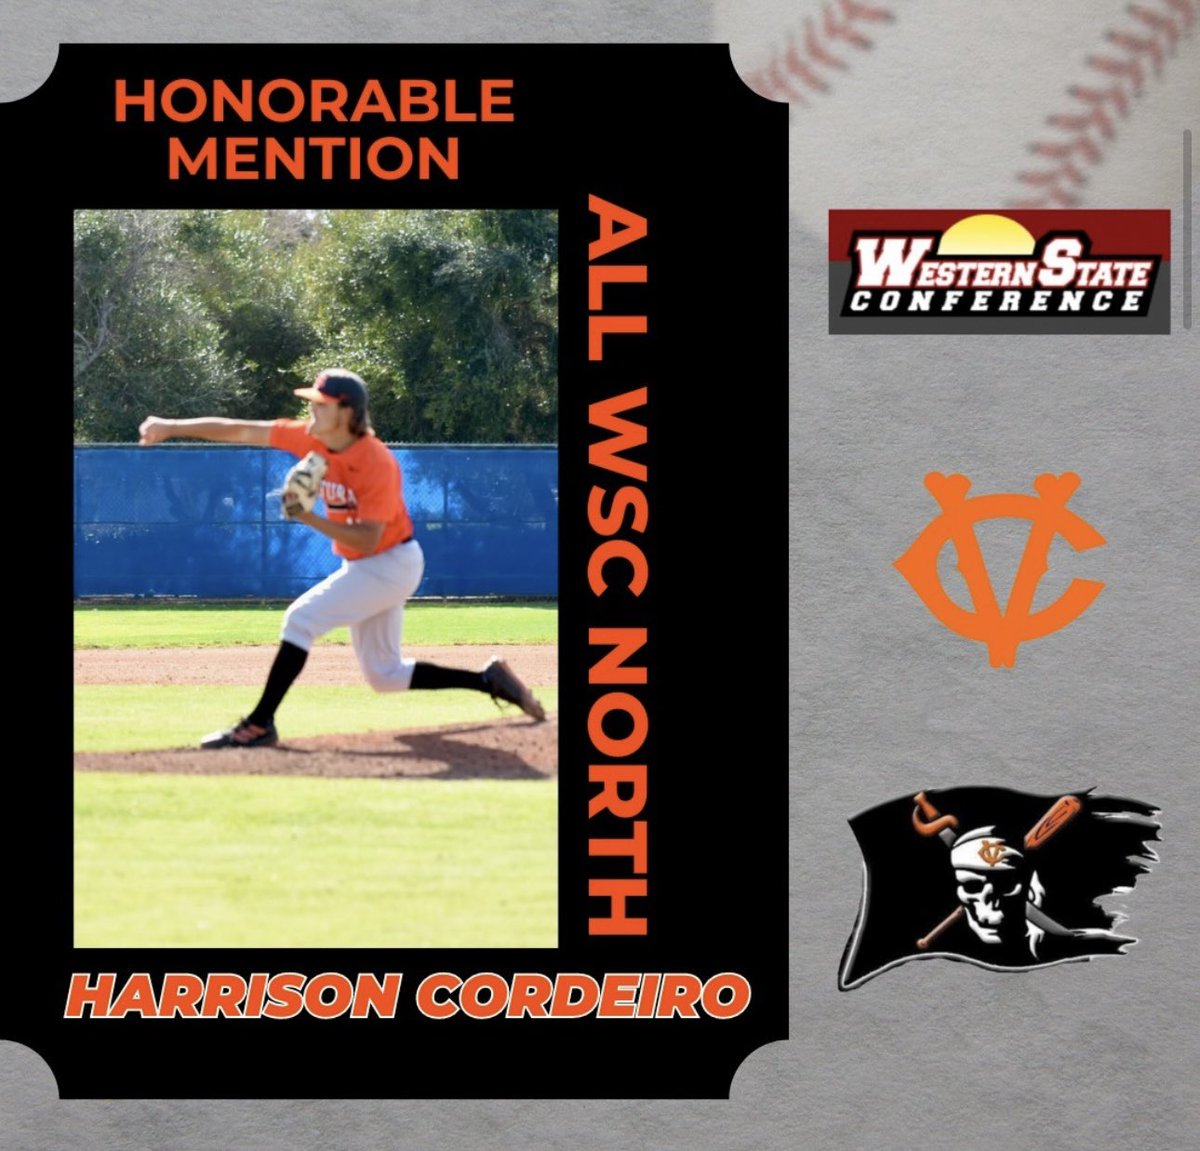 Congratulations to Harrison Cordeiro on earning  Honorable Mention All-Western State Conference this season.